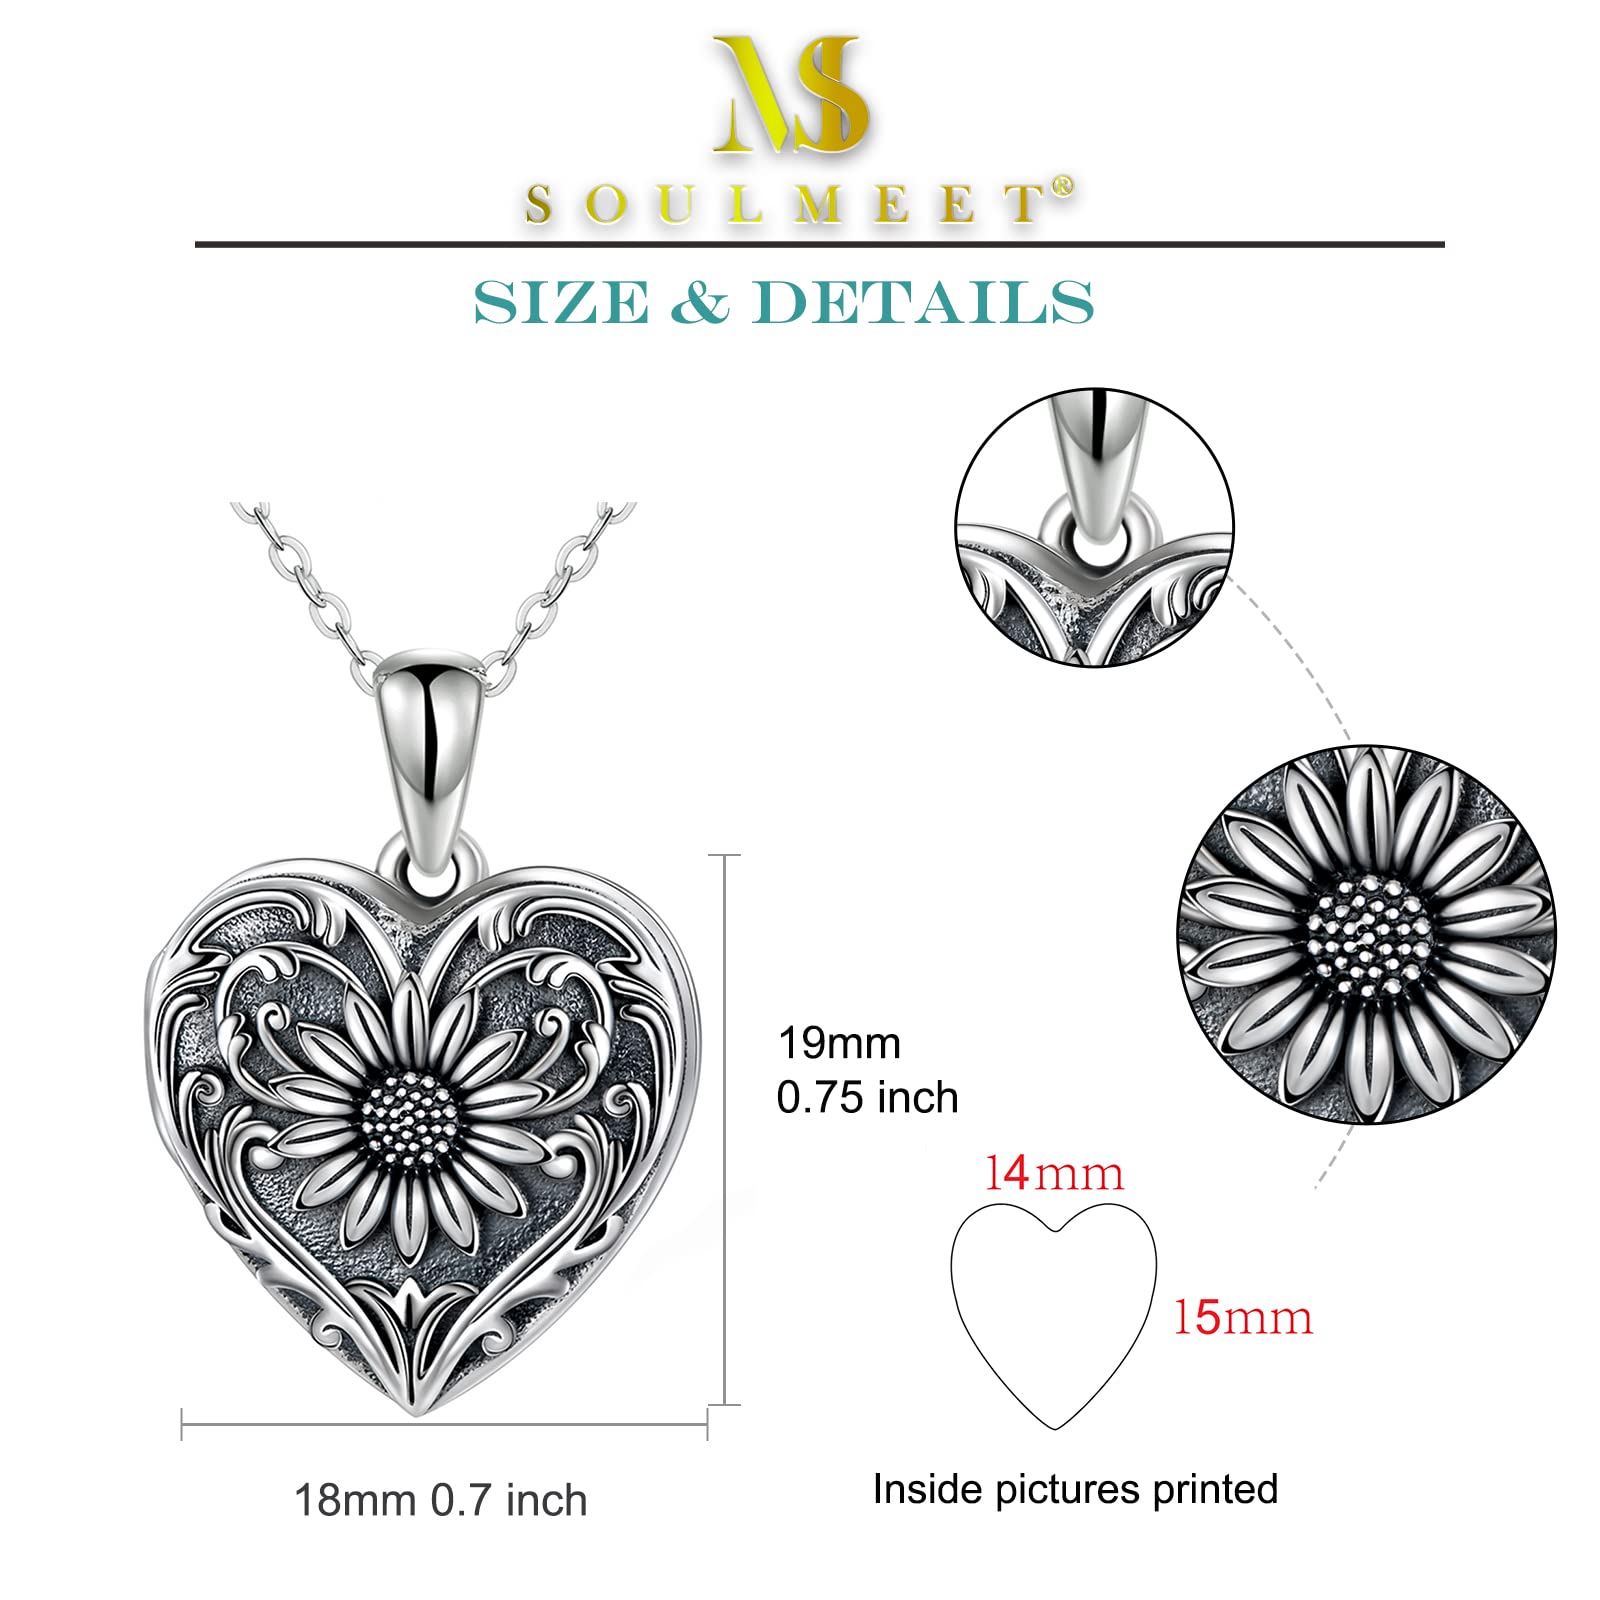 SOULMEET Sunflower Heart Shaped Locket Necklace That Holds Pictures Photo Keep Someone Near to You Sterling Silver/Gold Custom Jewelry Personalized Locket Necklace